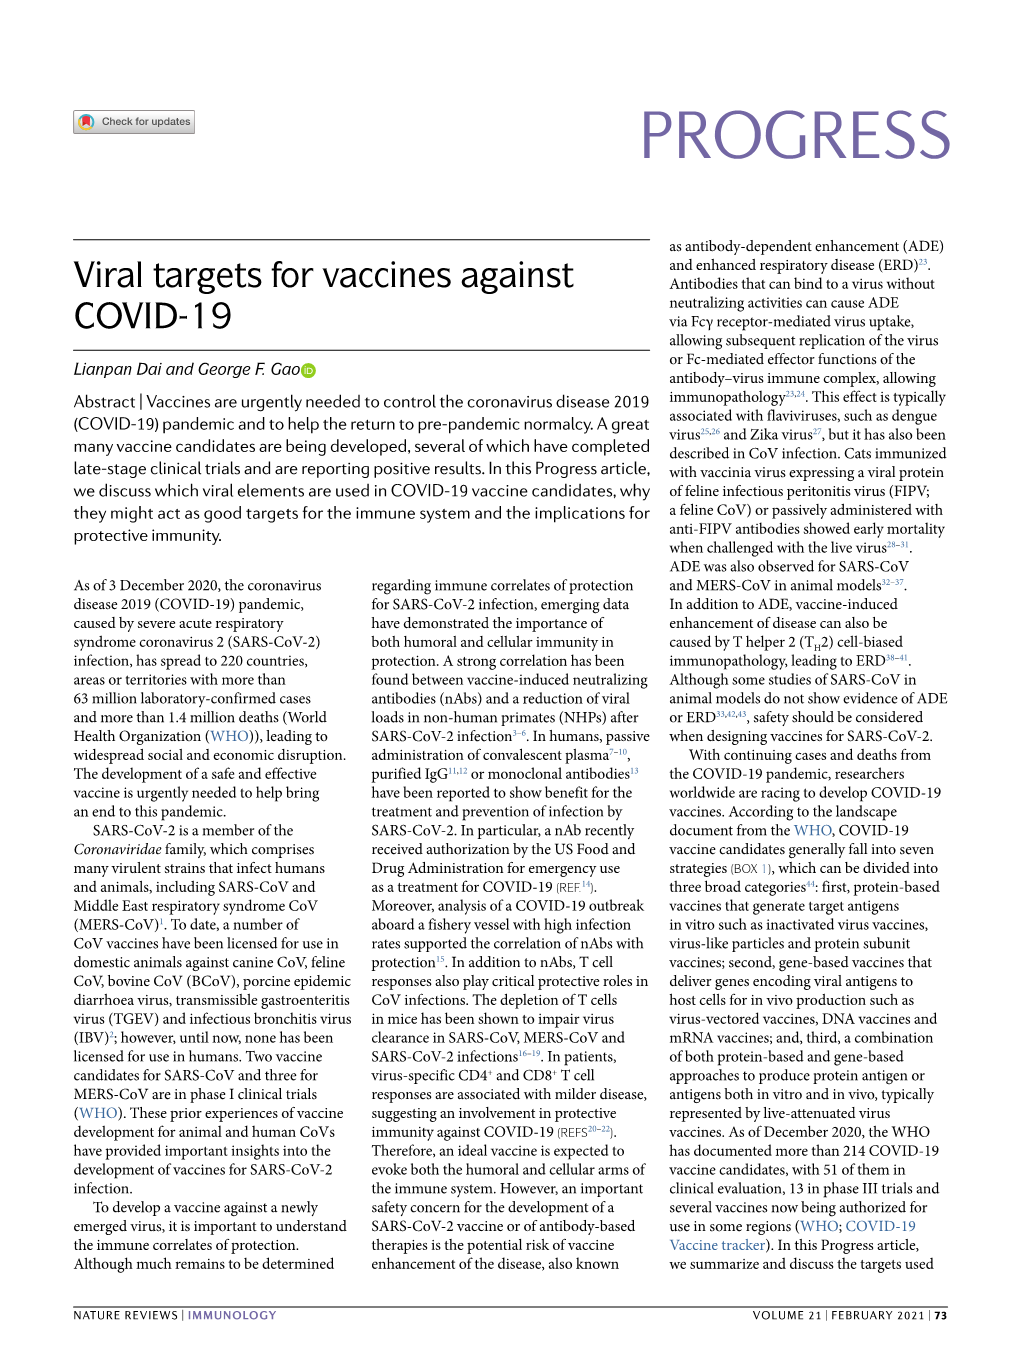 Viral Targets for Vaccines Against COVID-19